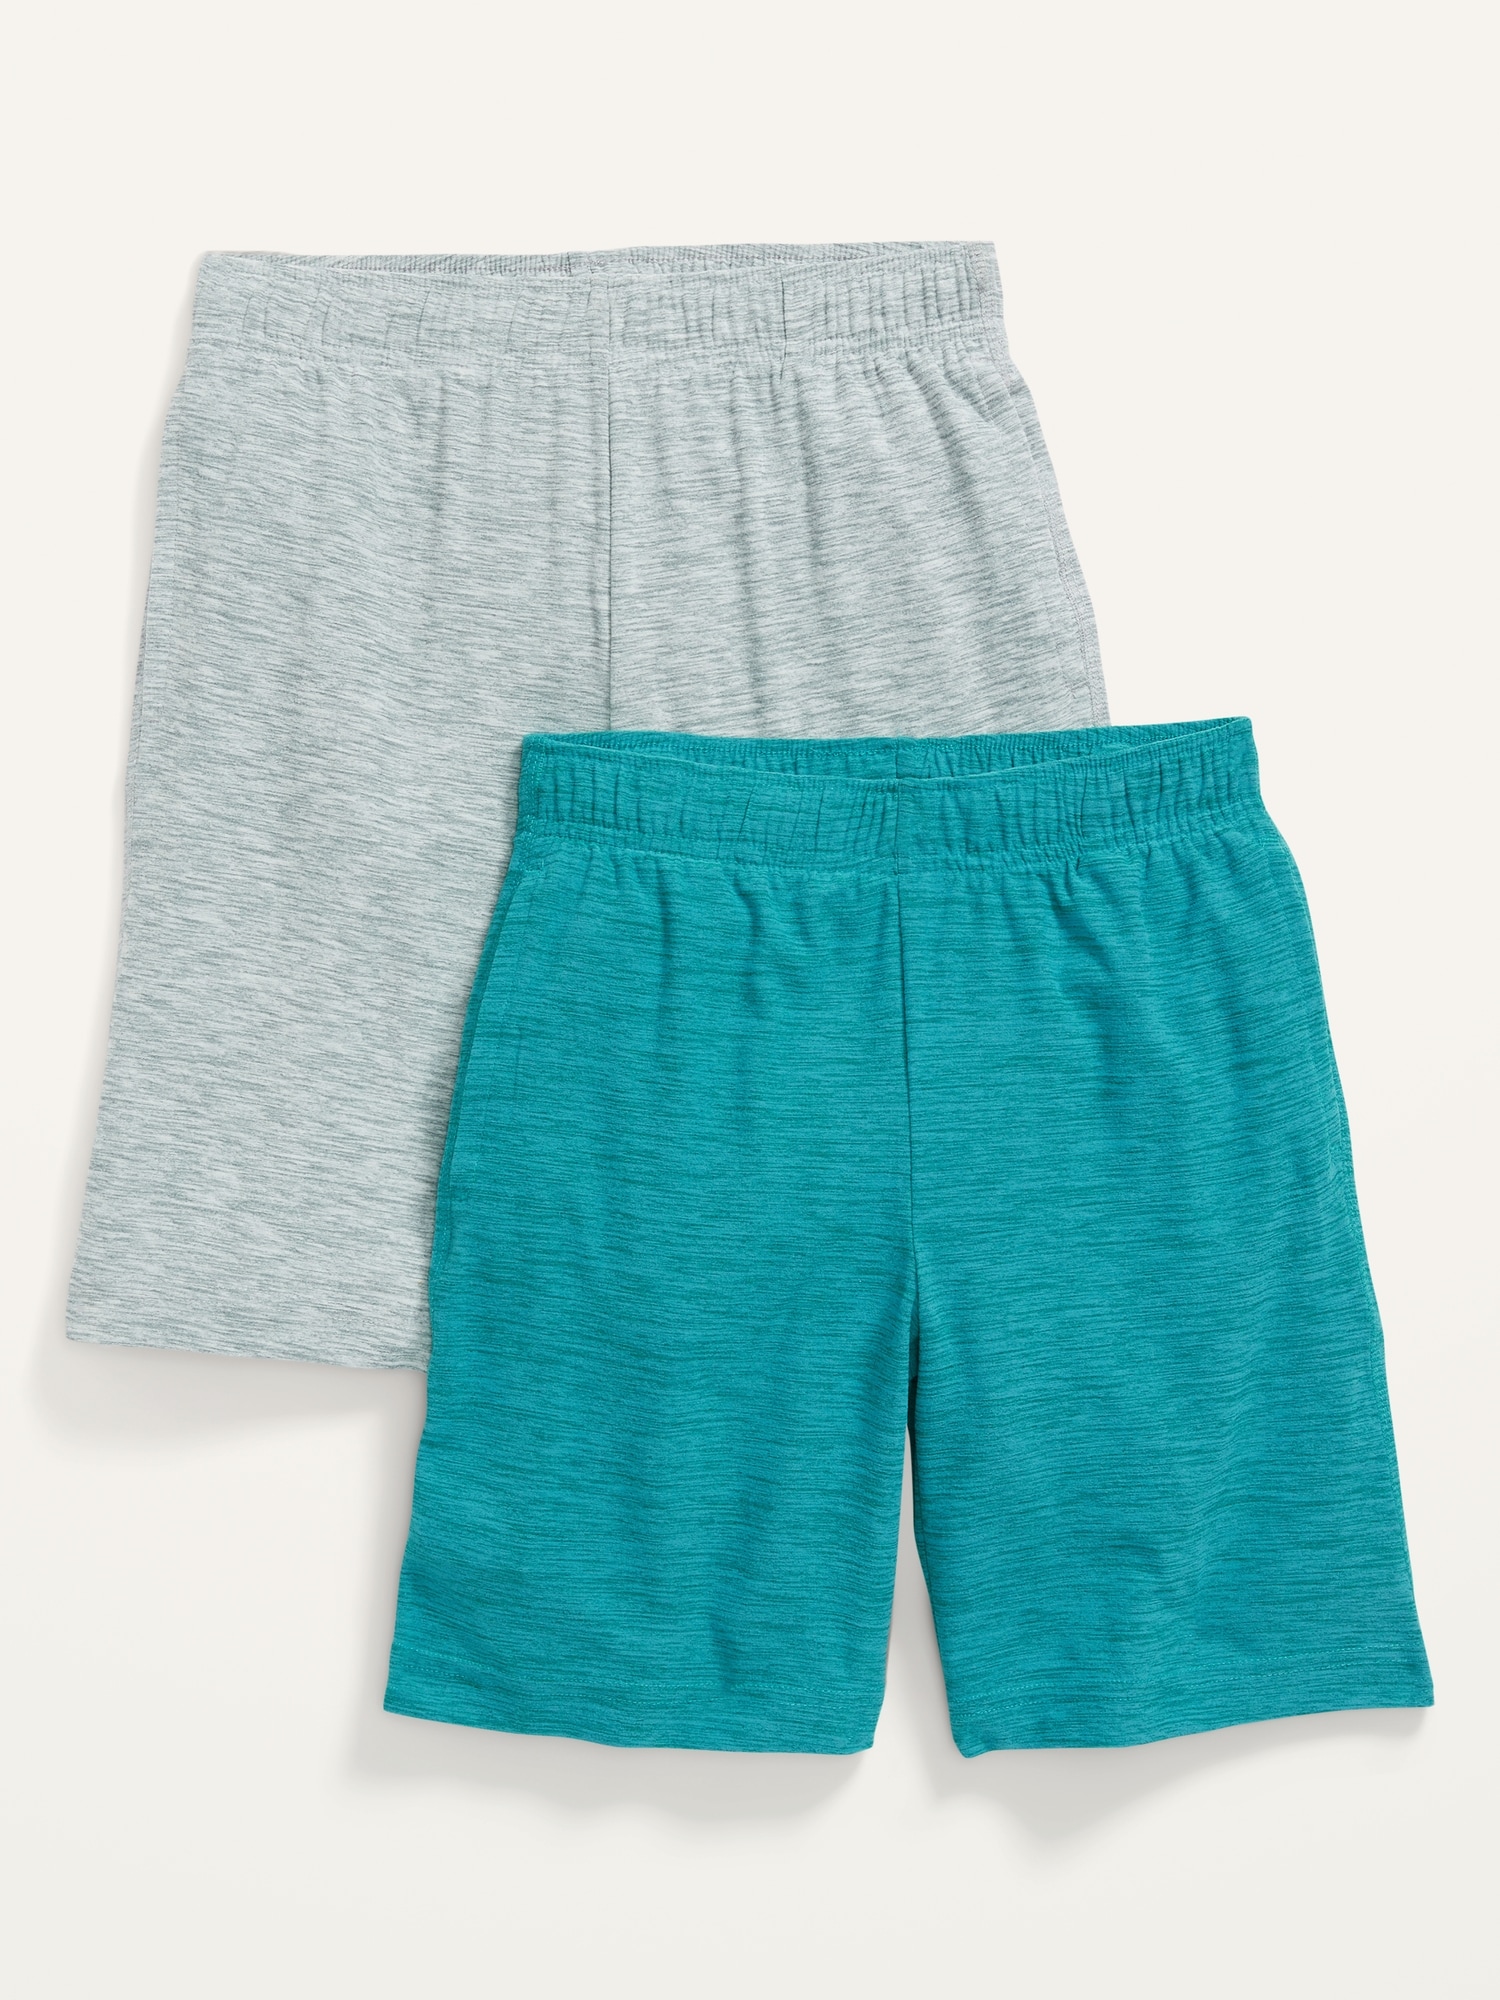 Breathe ON Shorts 2-Pack for Boys